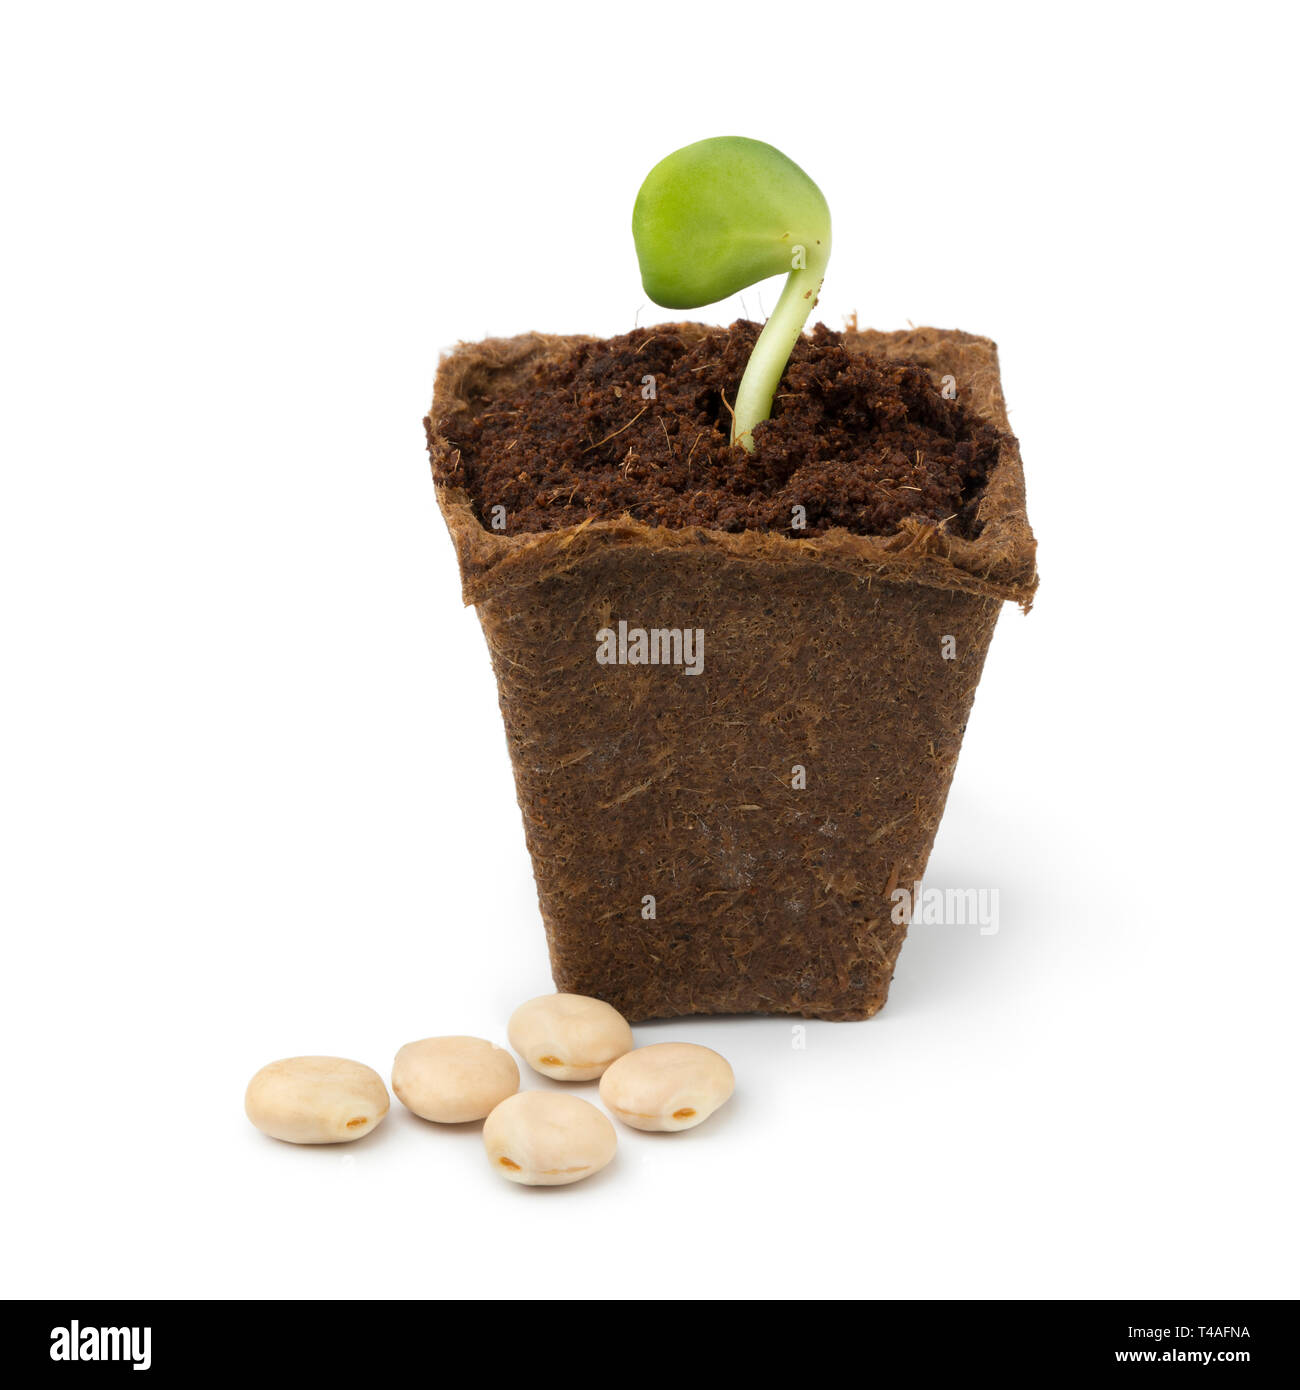 Sprouting white lupin plant in a special growing pot and soil isolated on white background Stock Photo